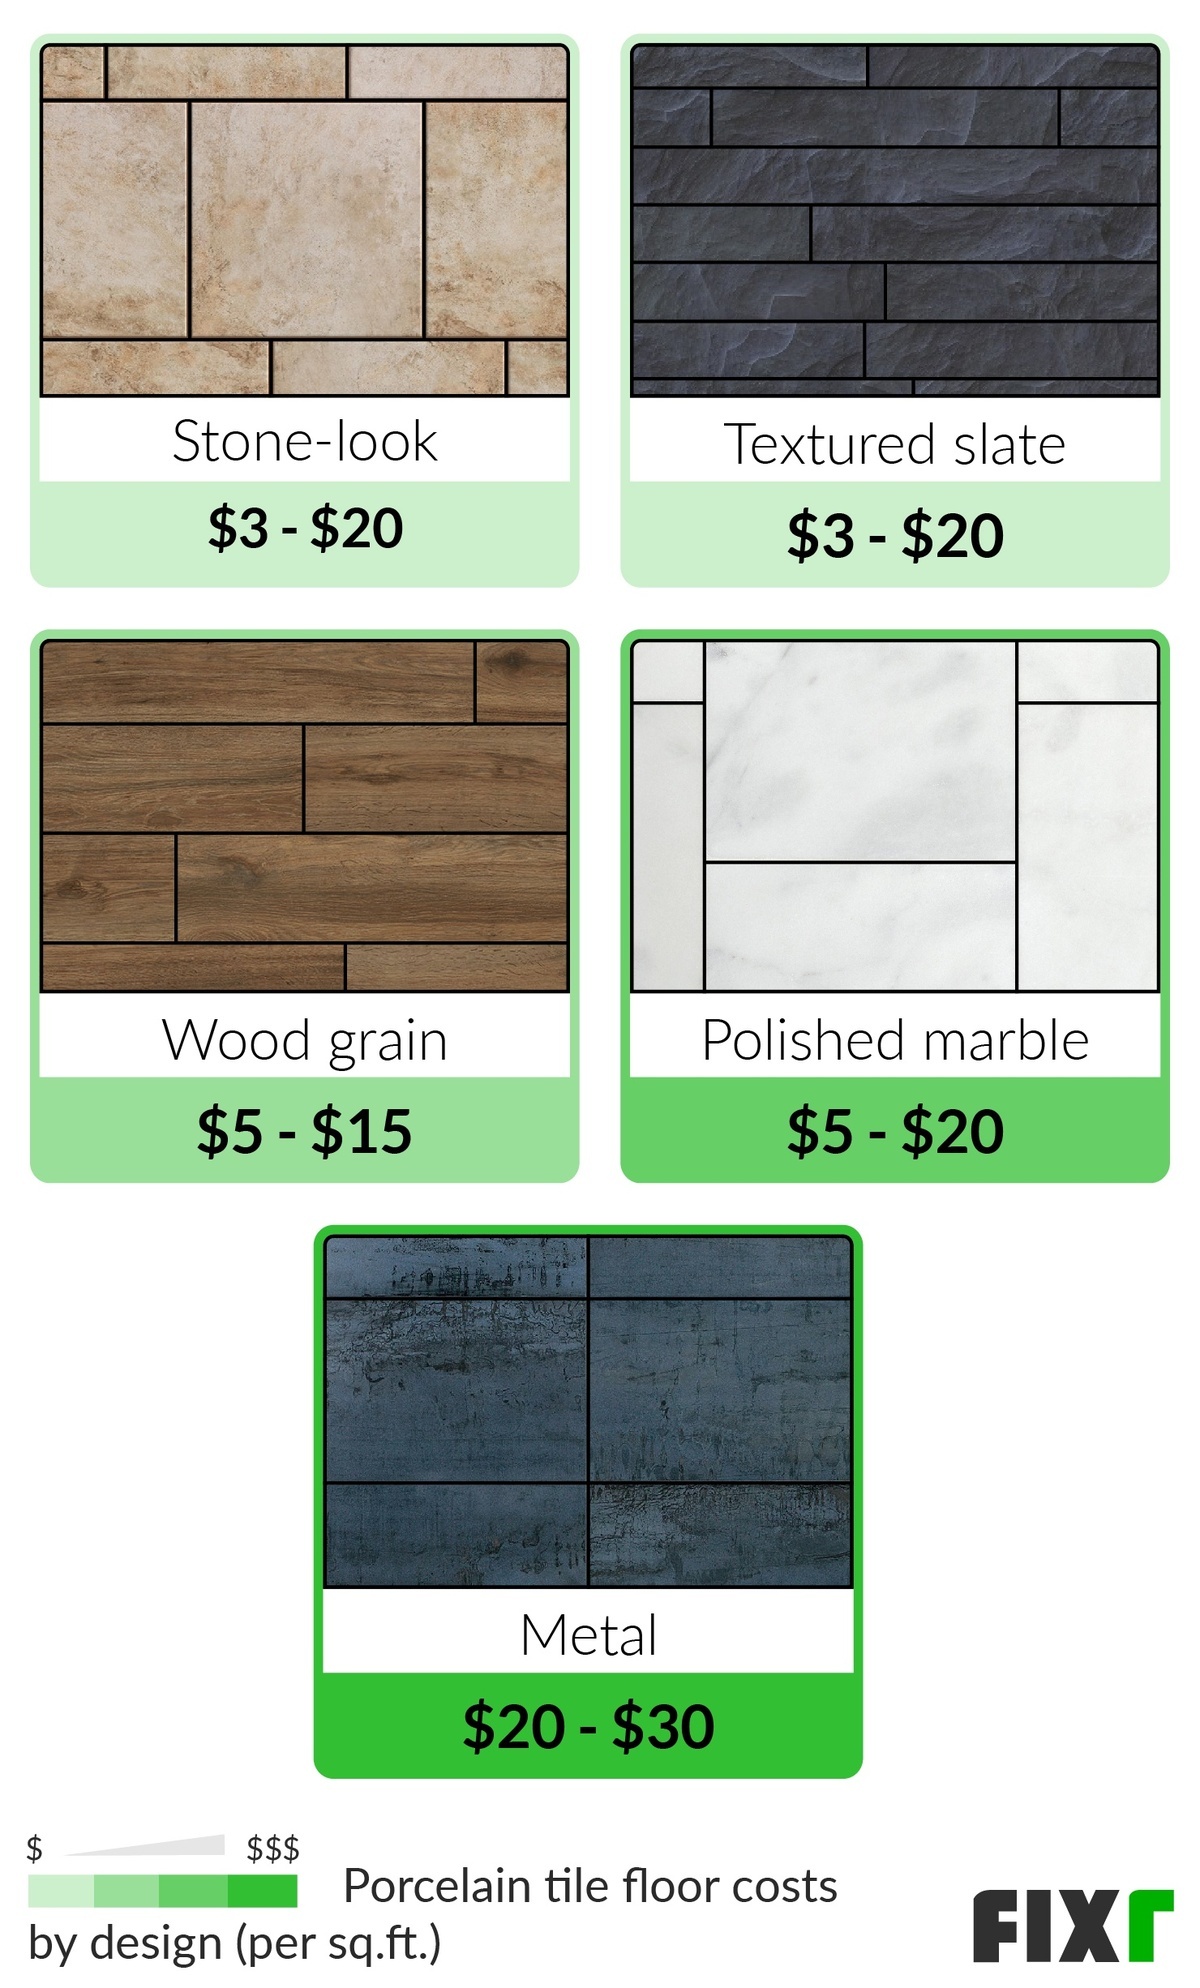 Cost Of Porcelain Tile Flooring, What Is The Average Cost Per Square Foot To Install Porcelain Tile